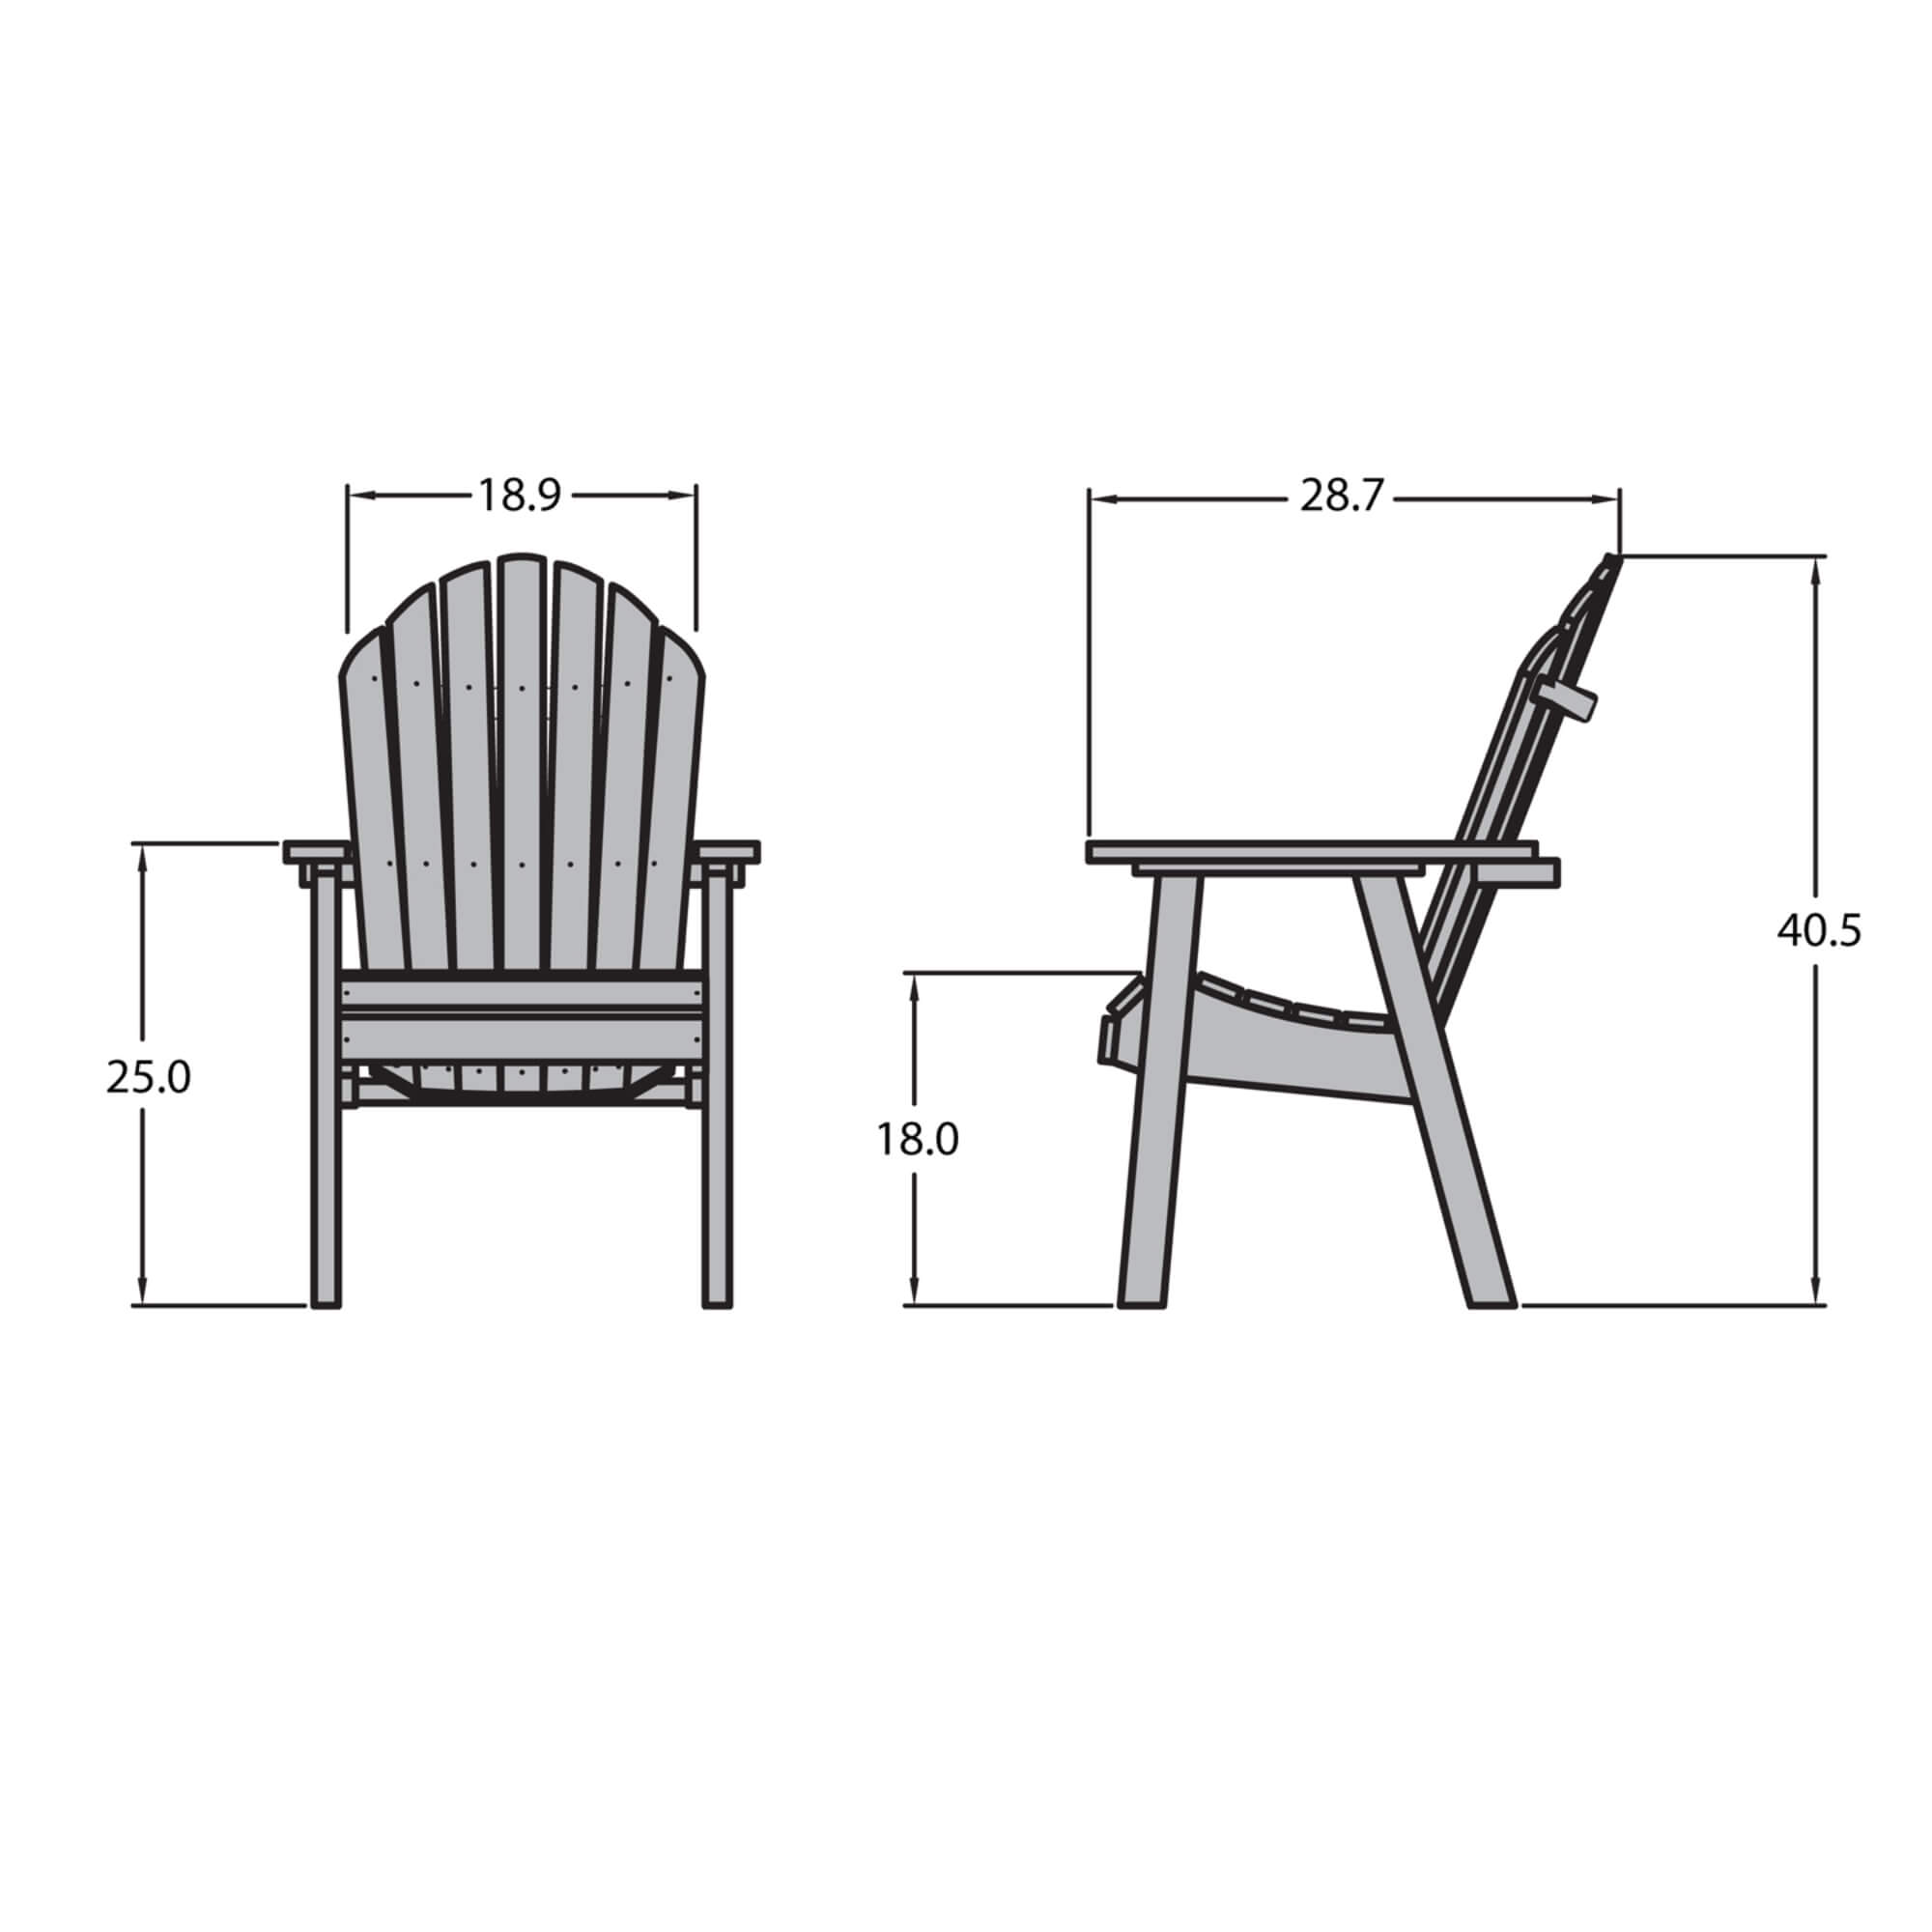 The Sequoia Professional Commercial Grade Muskoka Adirondack Deck Dining Chair - image 2 of 2